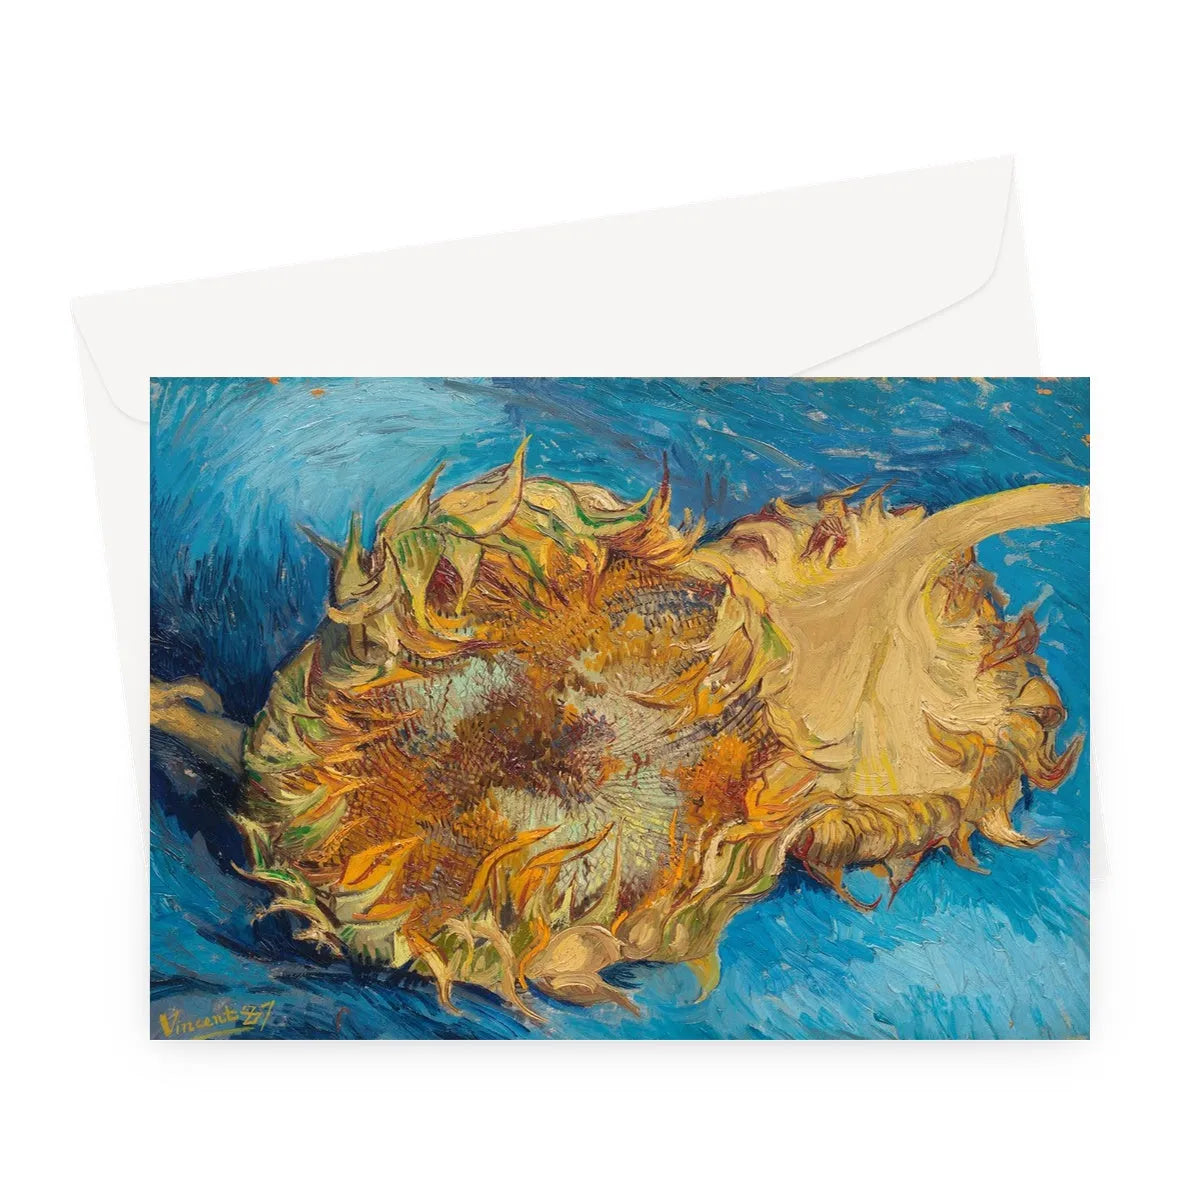 Sunflowers By Vincent Van Gogh Greeting Card - A5 Landscape / 1 Card - Greeting & Note Cards - Aesthetic Art